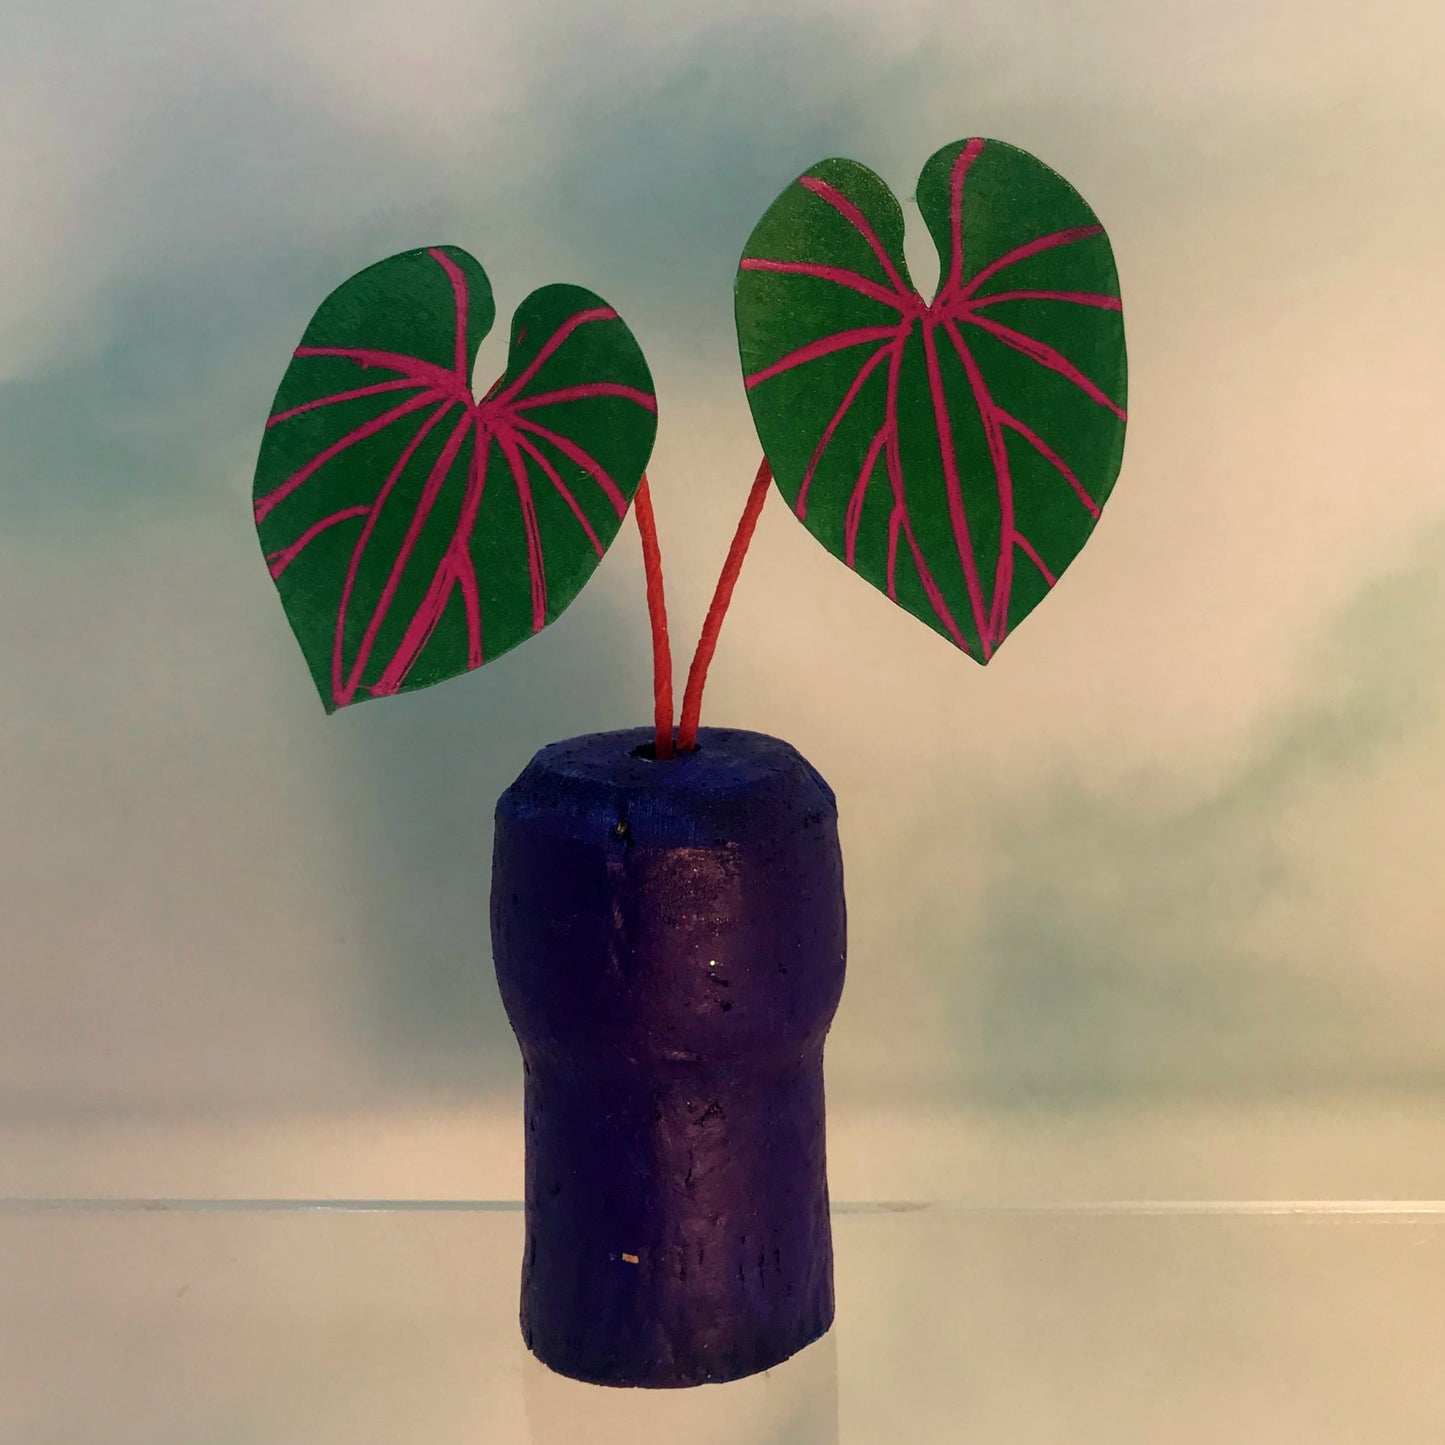 Tiny Magical Paper House Plant in Upcycled Painted Cork  - DECORATIVE MAGNET